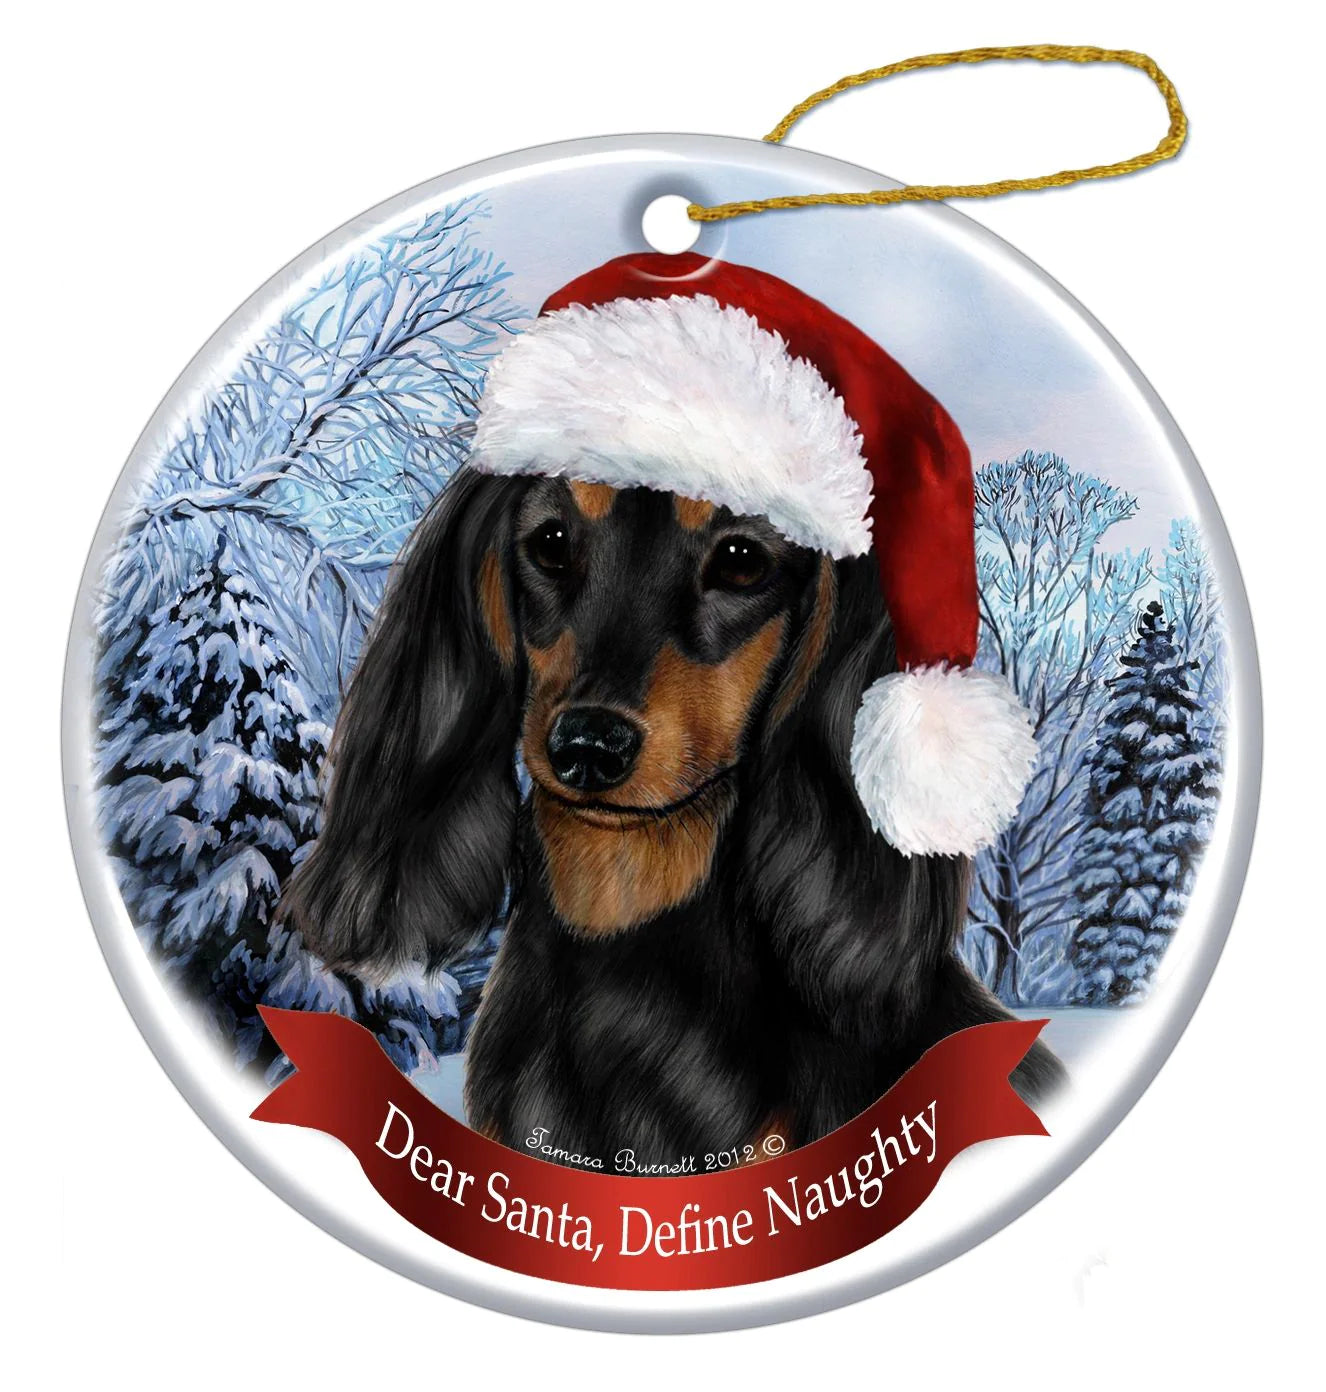 Holiday Ornaments - Get the Set